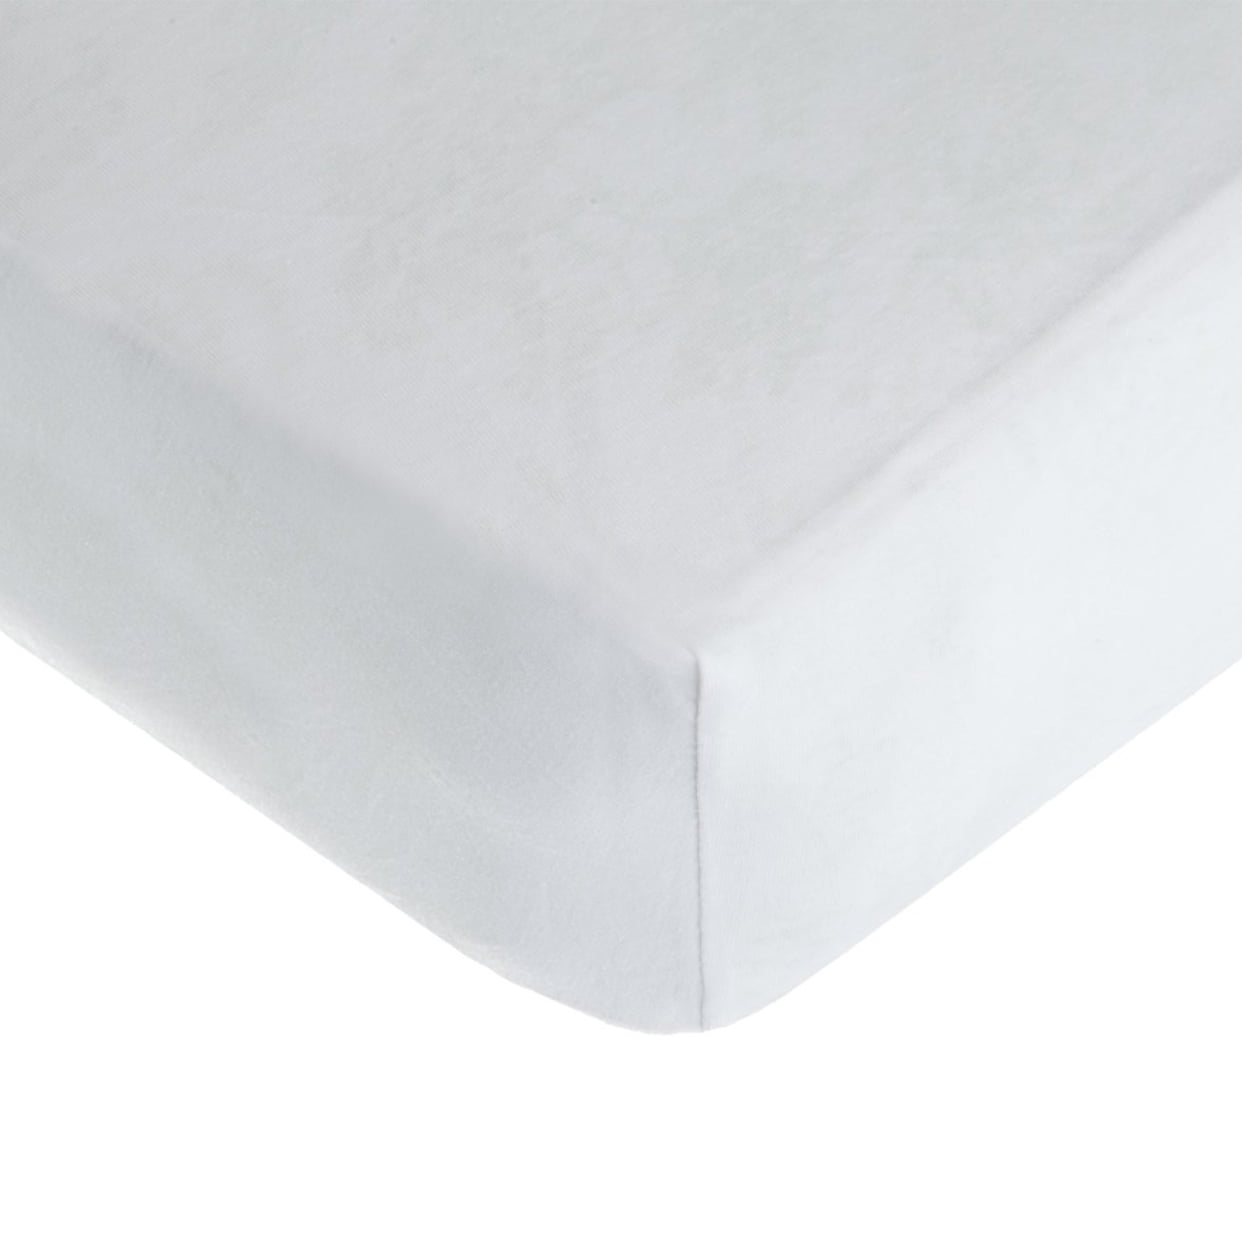 TL Care 100% Cotton Jersey Knit Fitted Crib Sheets, White - Walmart.com